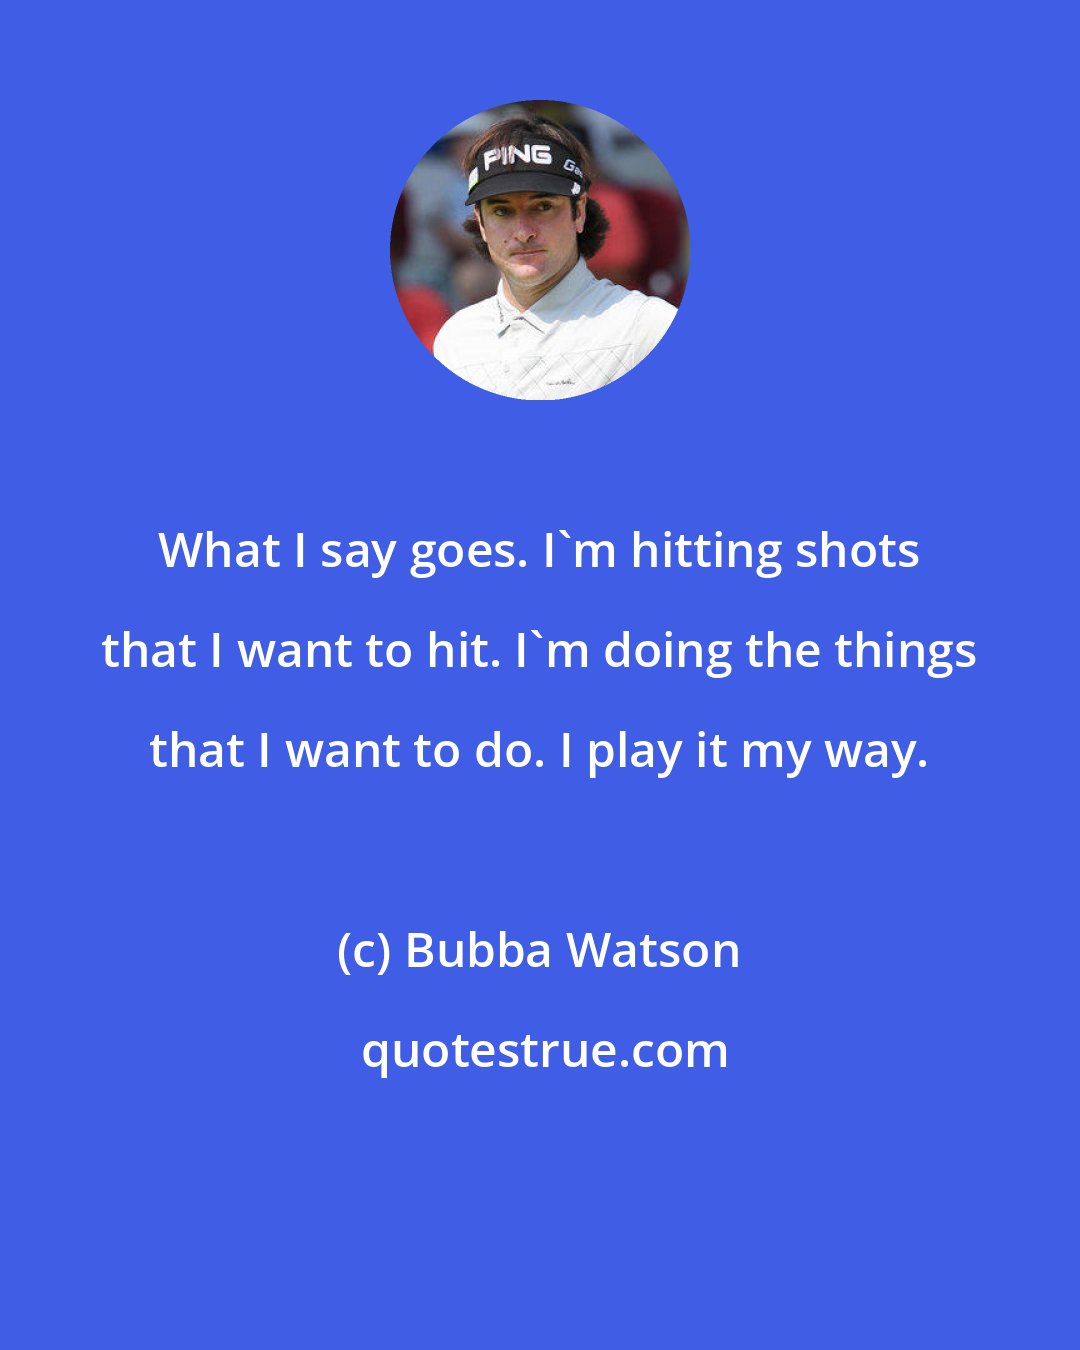 Bubba Watson: What I say goes. I'm hitting shots that I want to hit. I'm doing the things that I want to do. I play it my way.